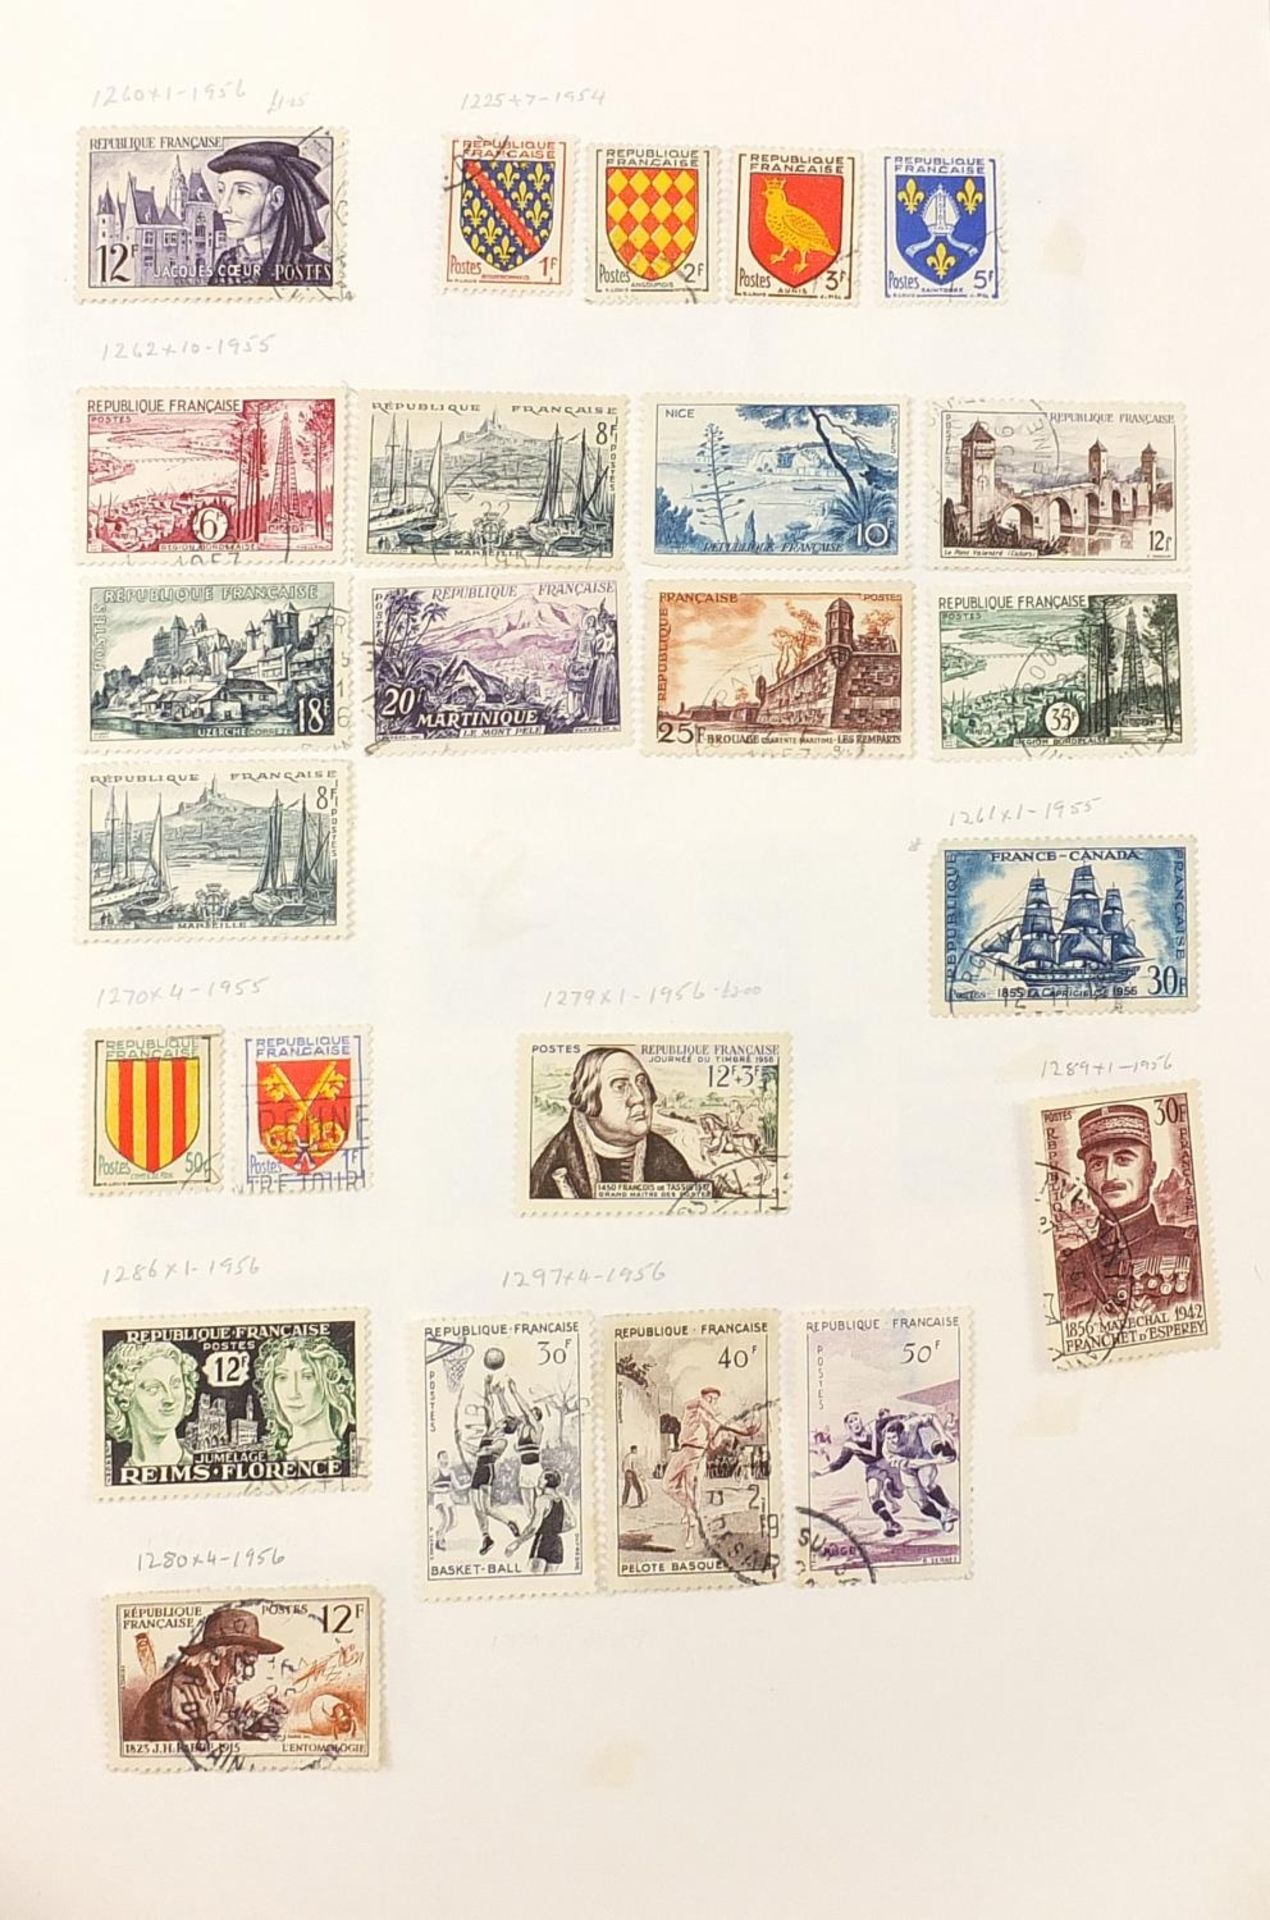 Extensive collection of antique and later world stamps arranged in albums including Brazil, - Image 11 of 52